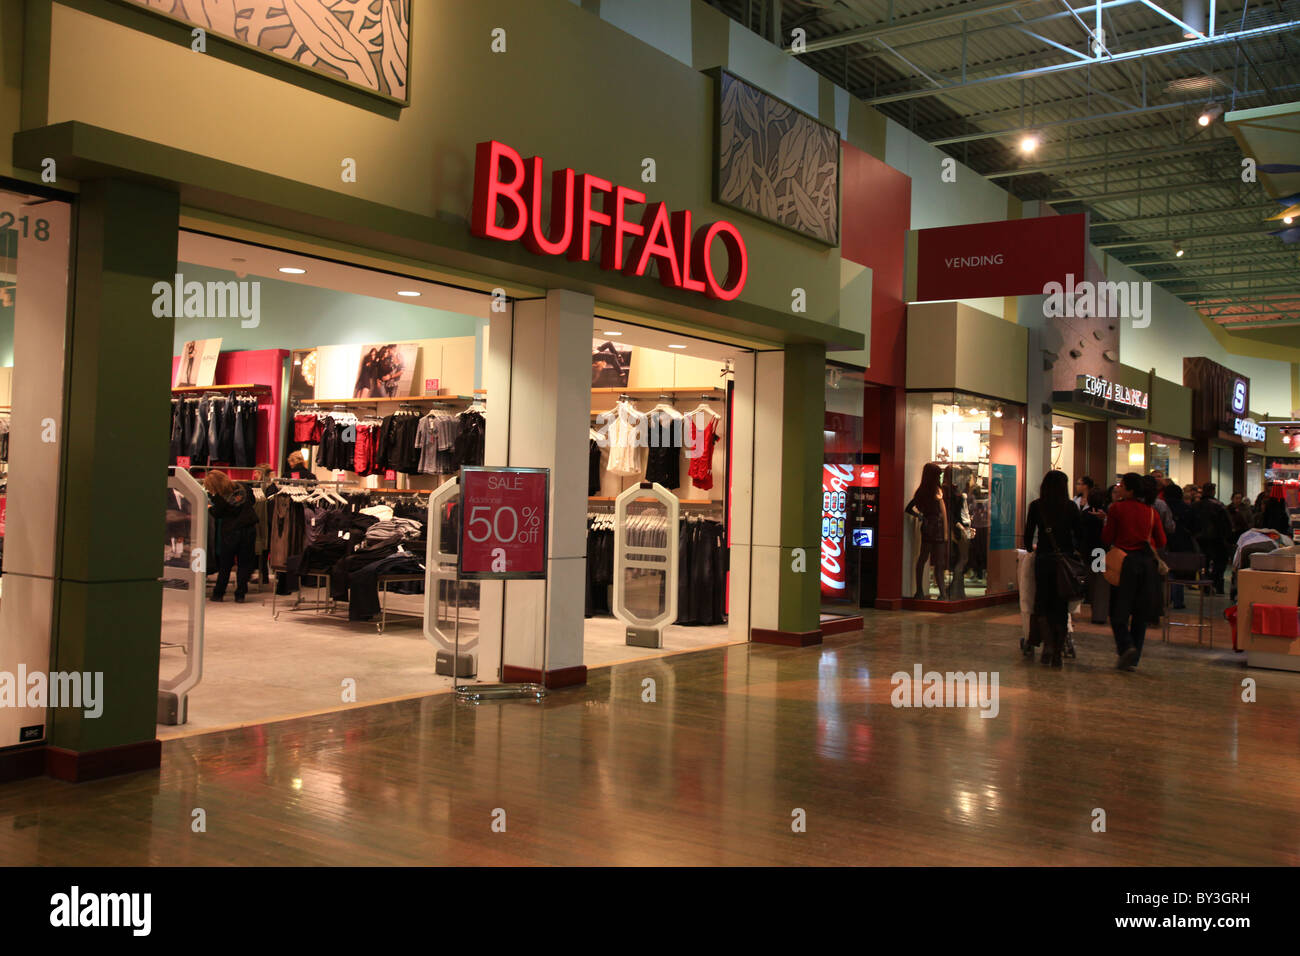 Buffalo clothing outlet store in Vaughan Mills Mall in Toronto, Canada Photo - Alamy